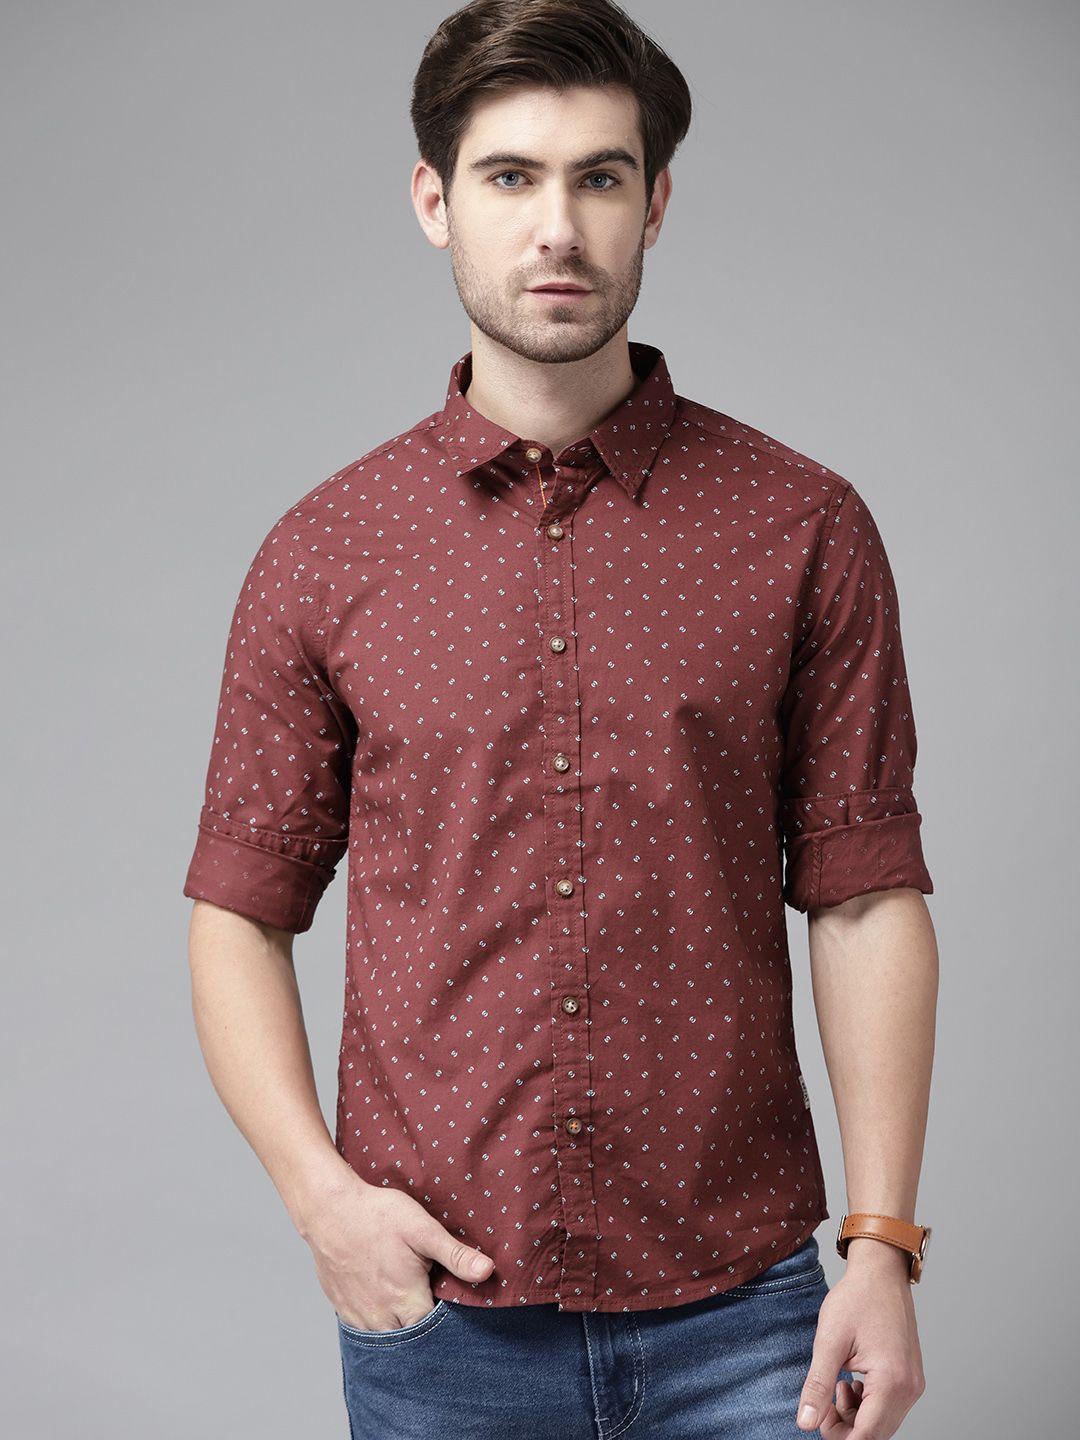 beat london by pepe jeans men maroon & white slim fit pure cotton printed casual shirt